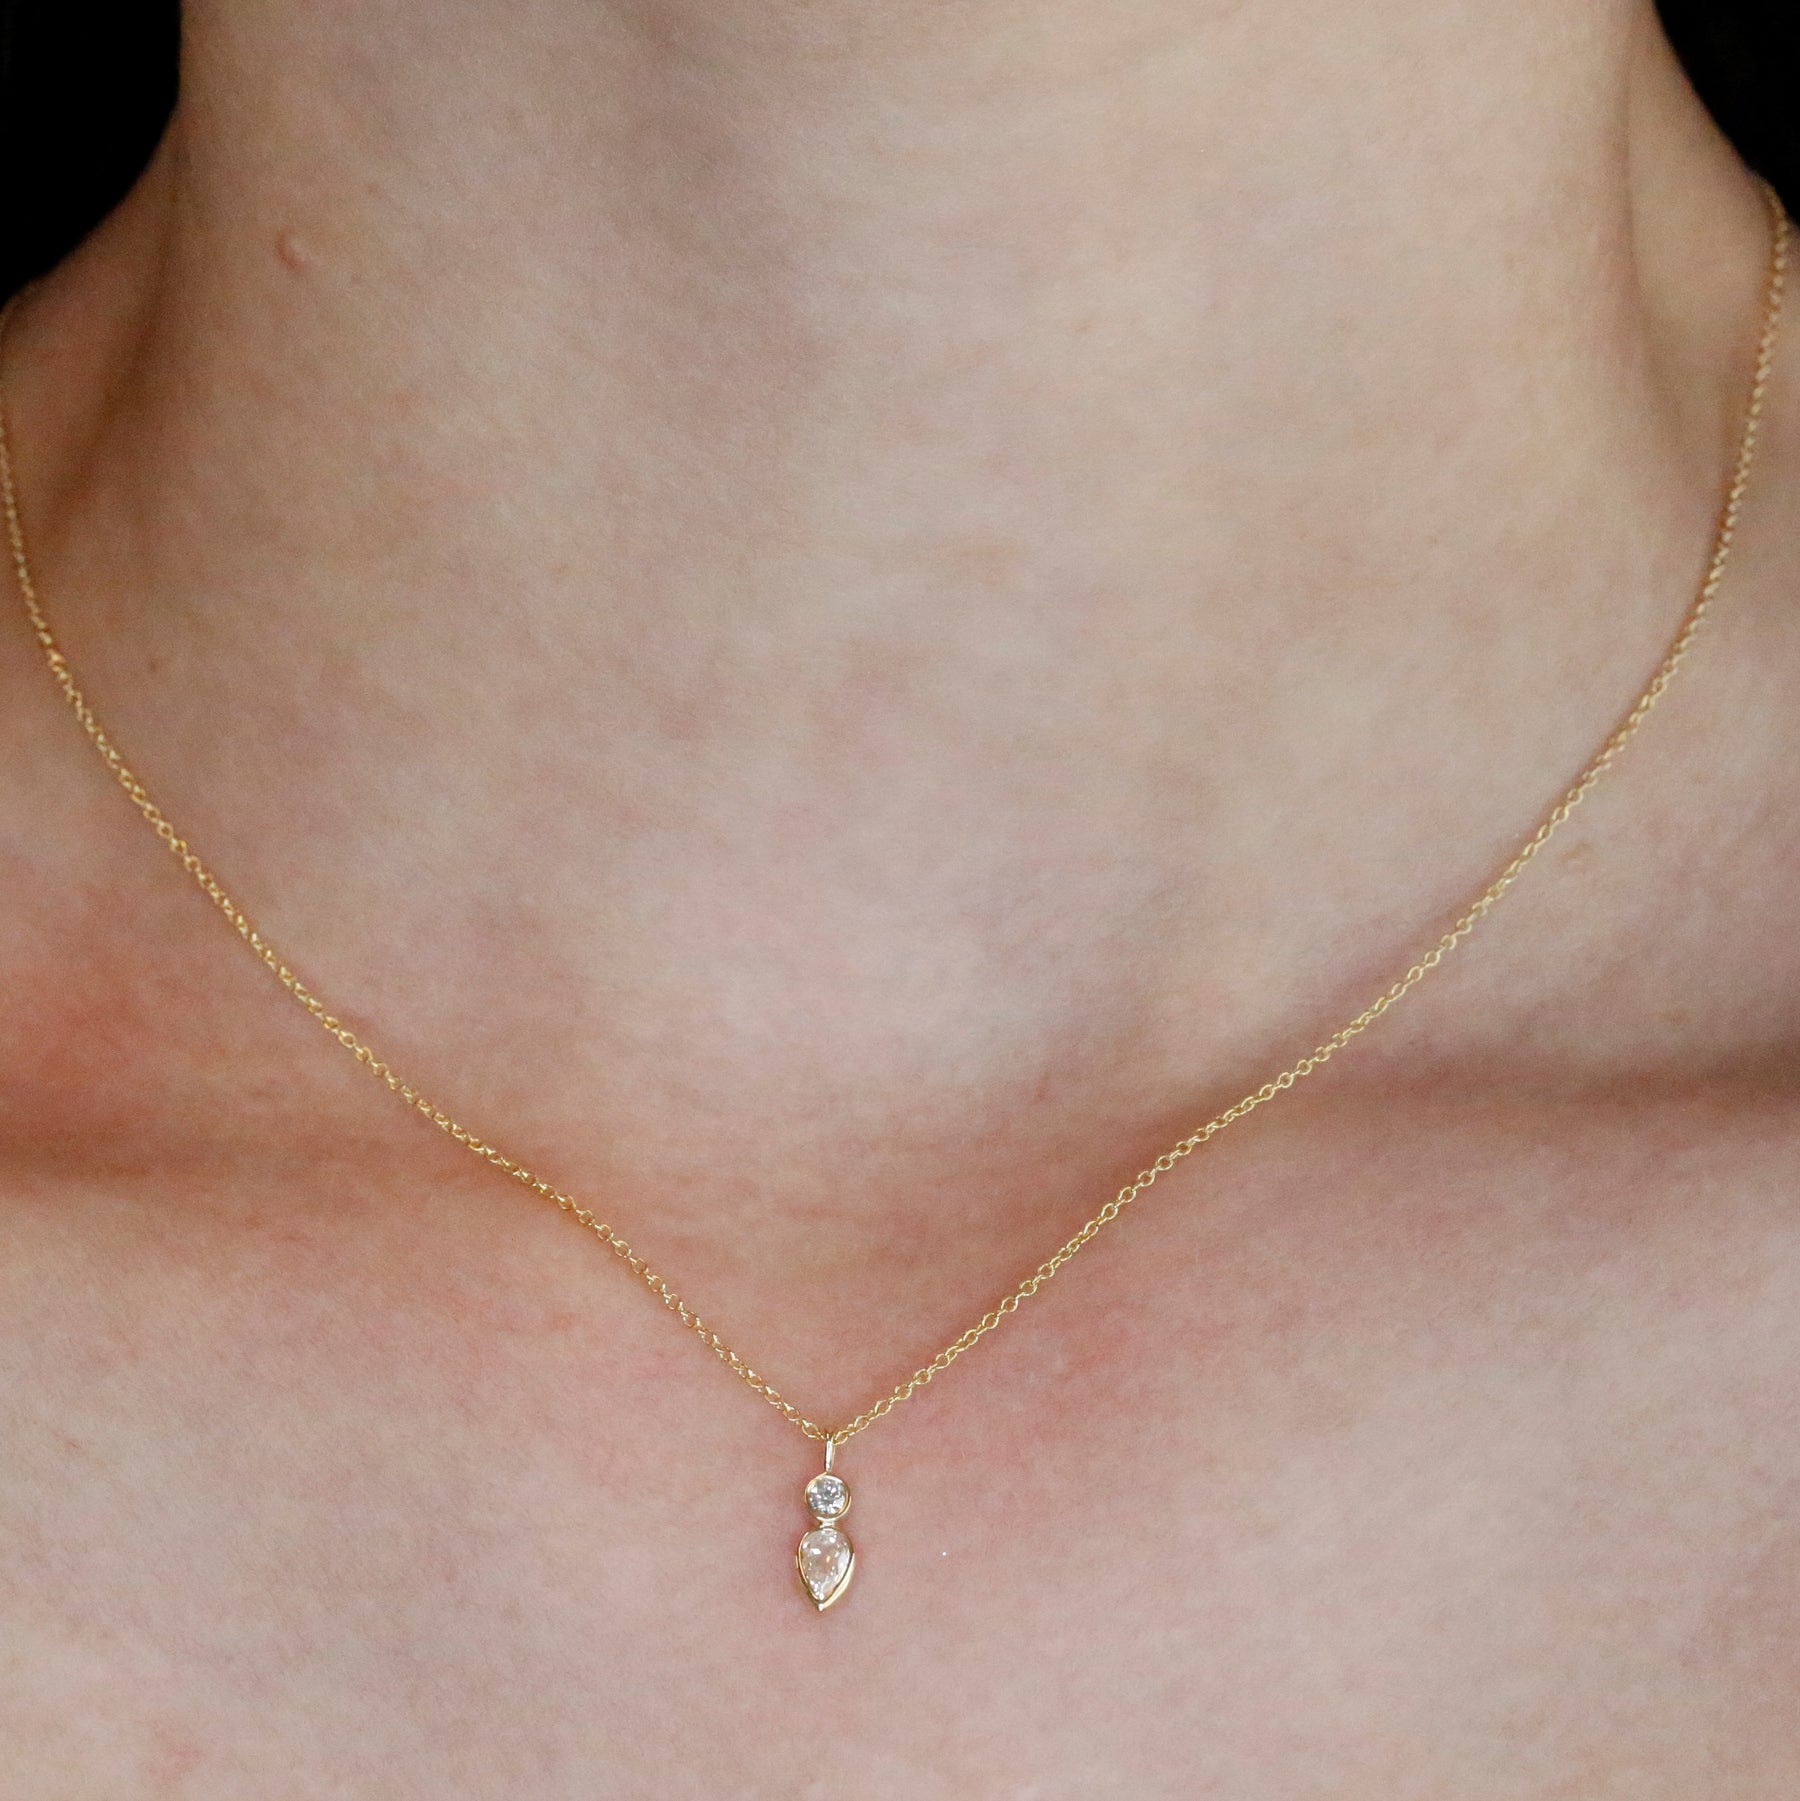 Amelia Chain Necklace in Gold